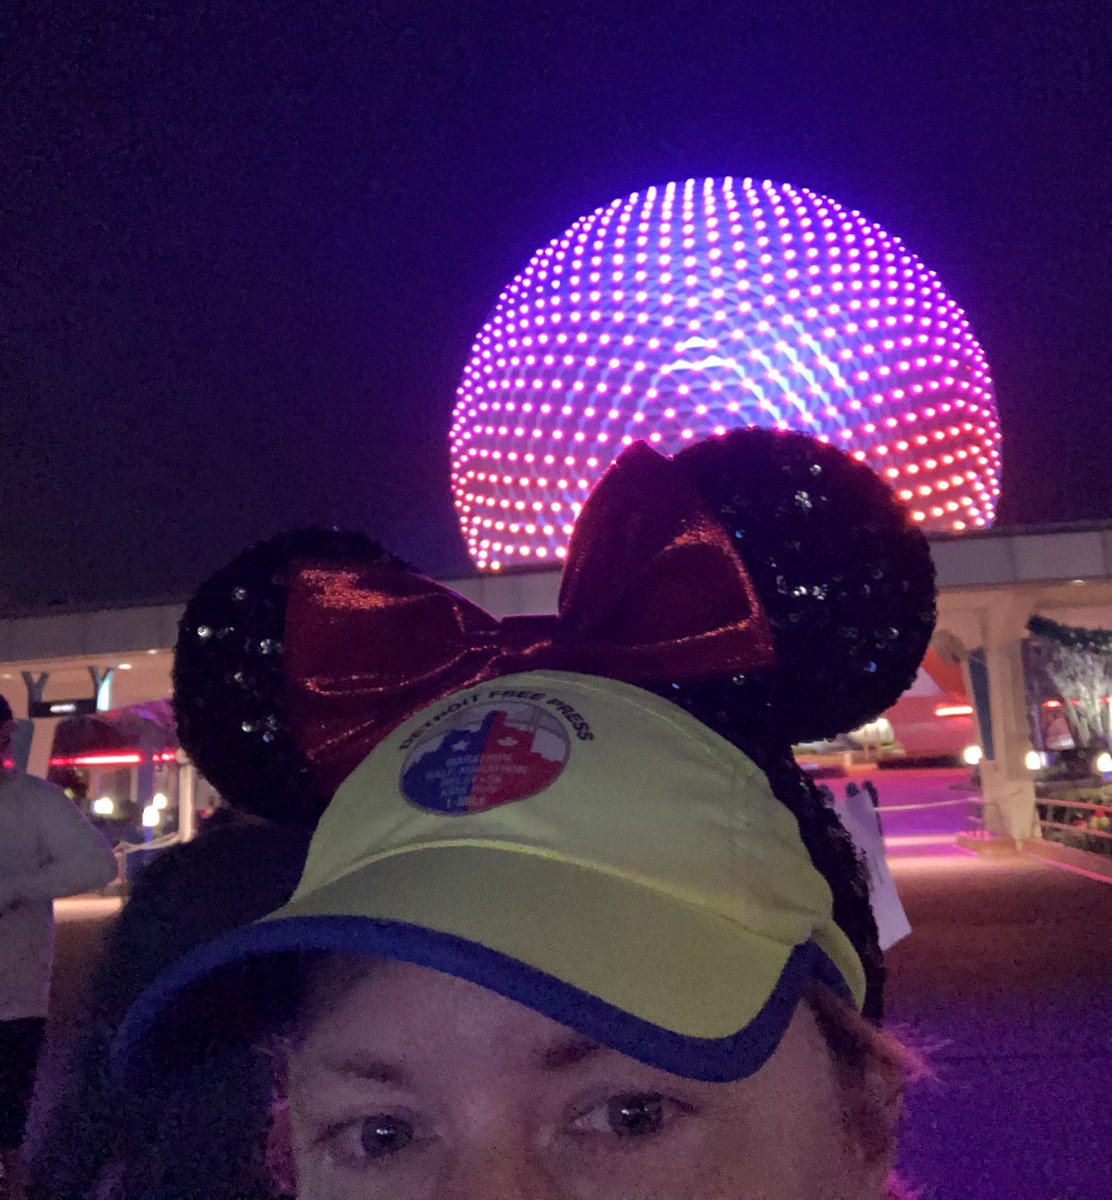 What am I doing at Epcot at 3:30 am? Getting ready to run the Disney World Marathon, that’s what! 🙌🏼 #disneyworld #disneymarathonweekend #disneymarathon #gladiwenttobedearly